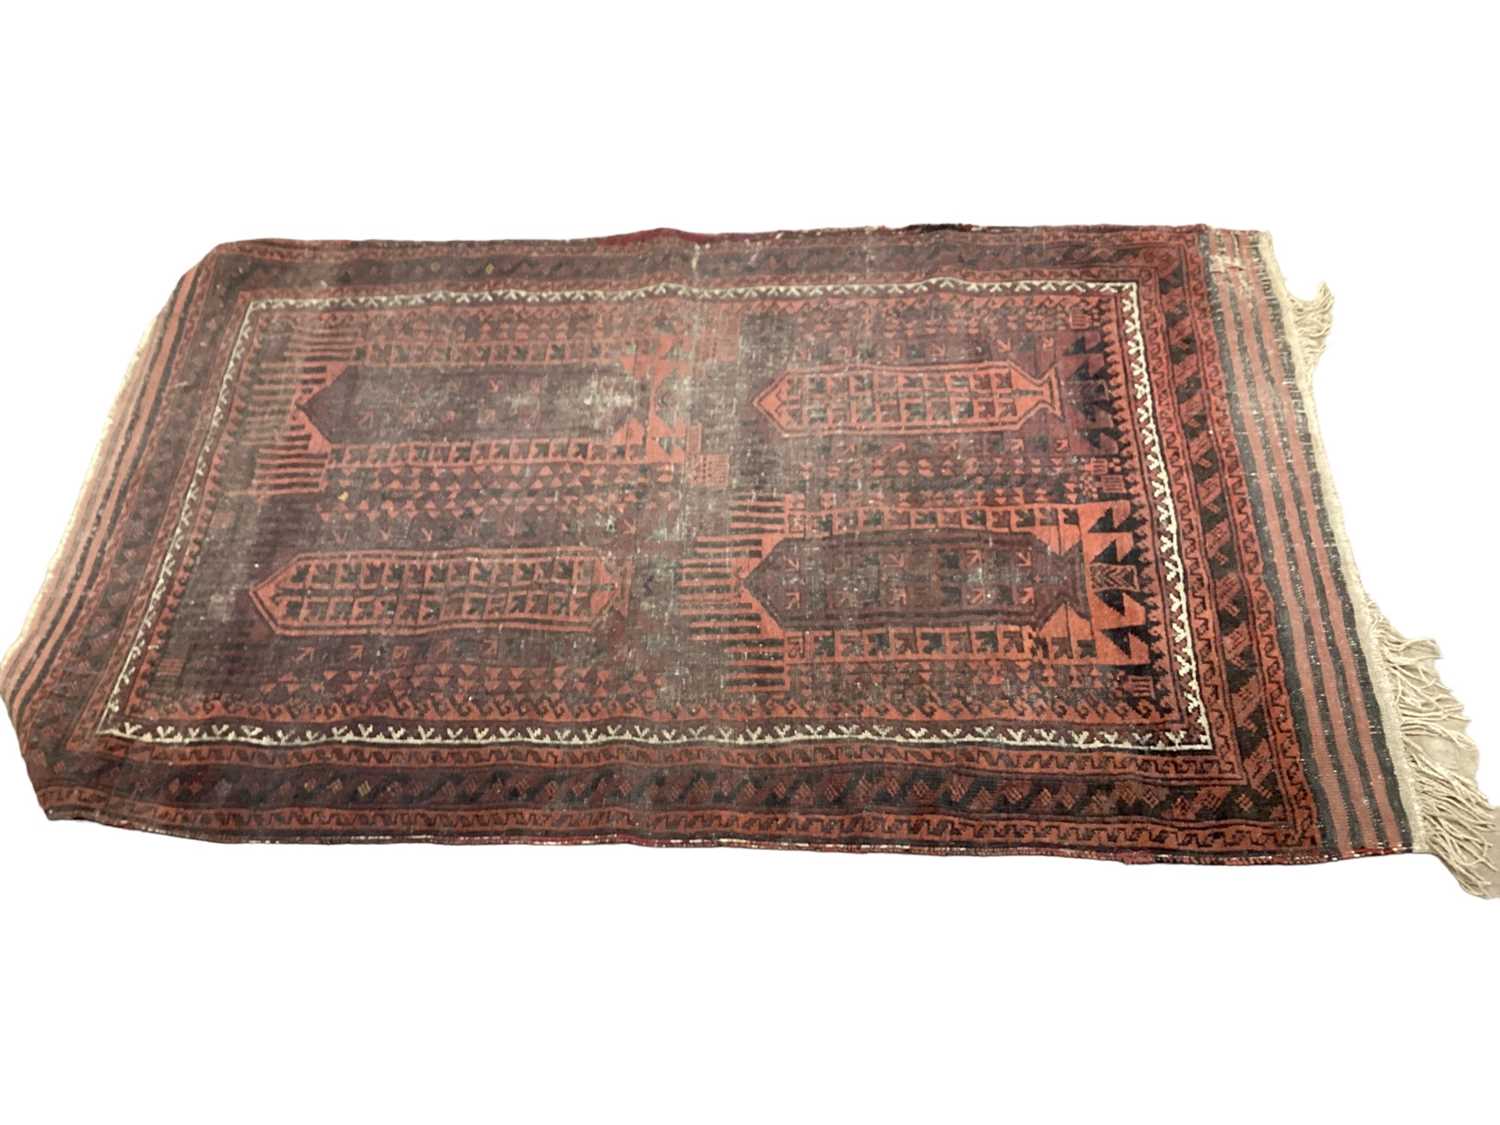 Two Eastern rugs with geometric decoration on red and blue ground, 175cm x 128cm - Image 4 of 6